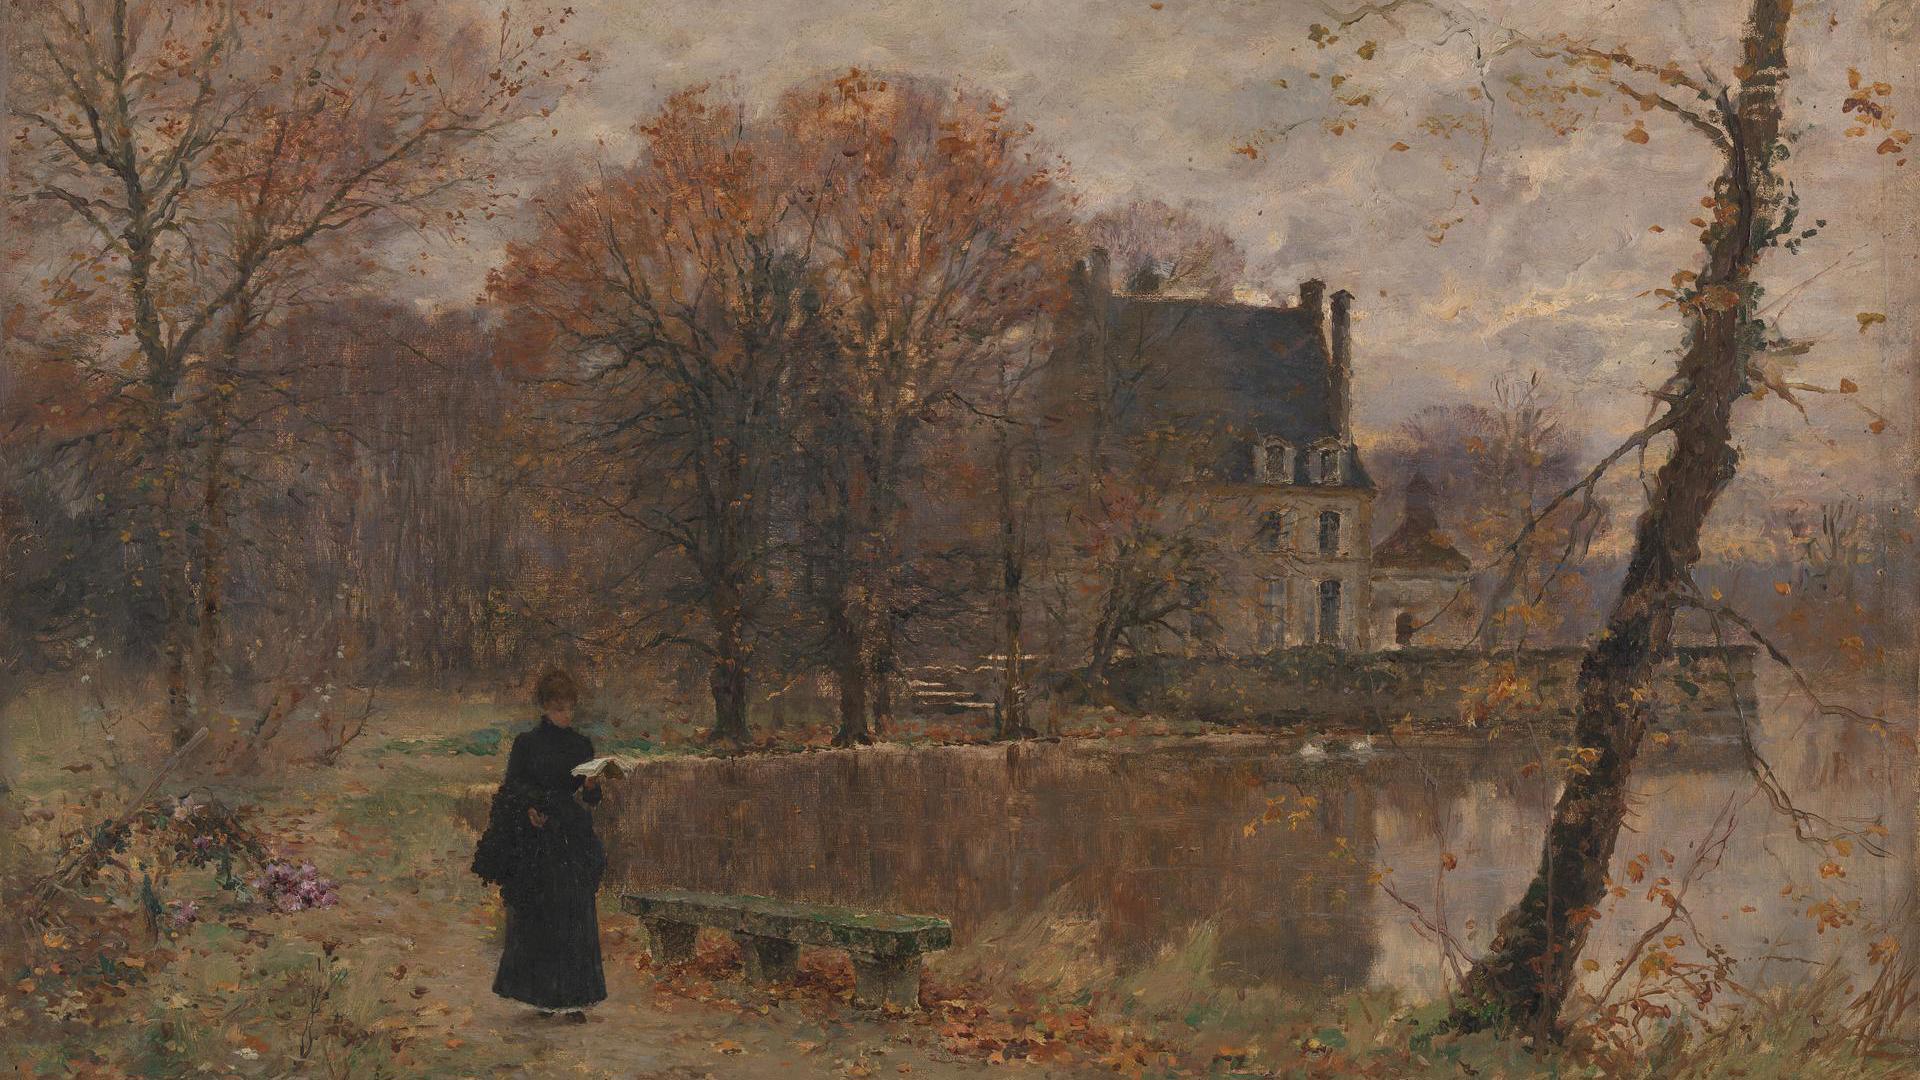 Park of Sansac (Indre-et-Loire) by Armand Charnay